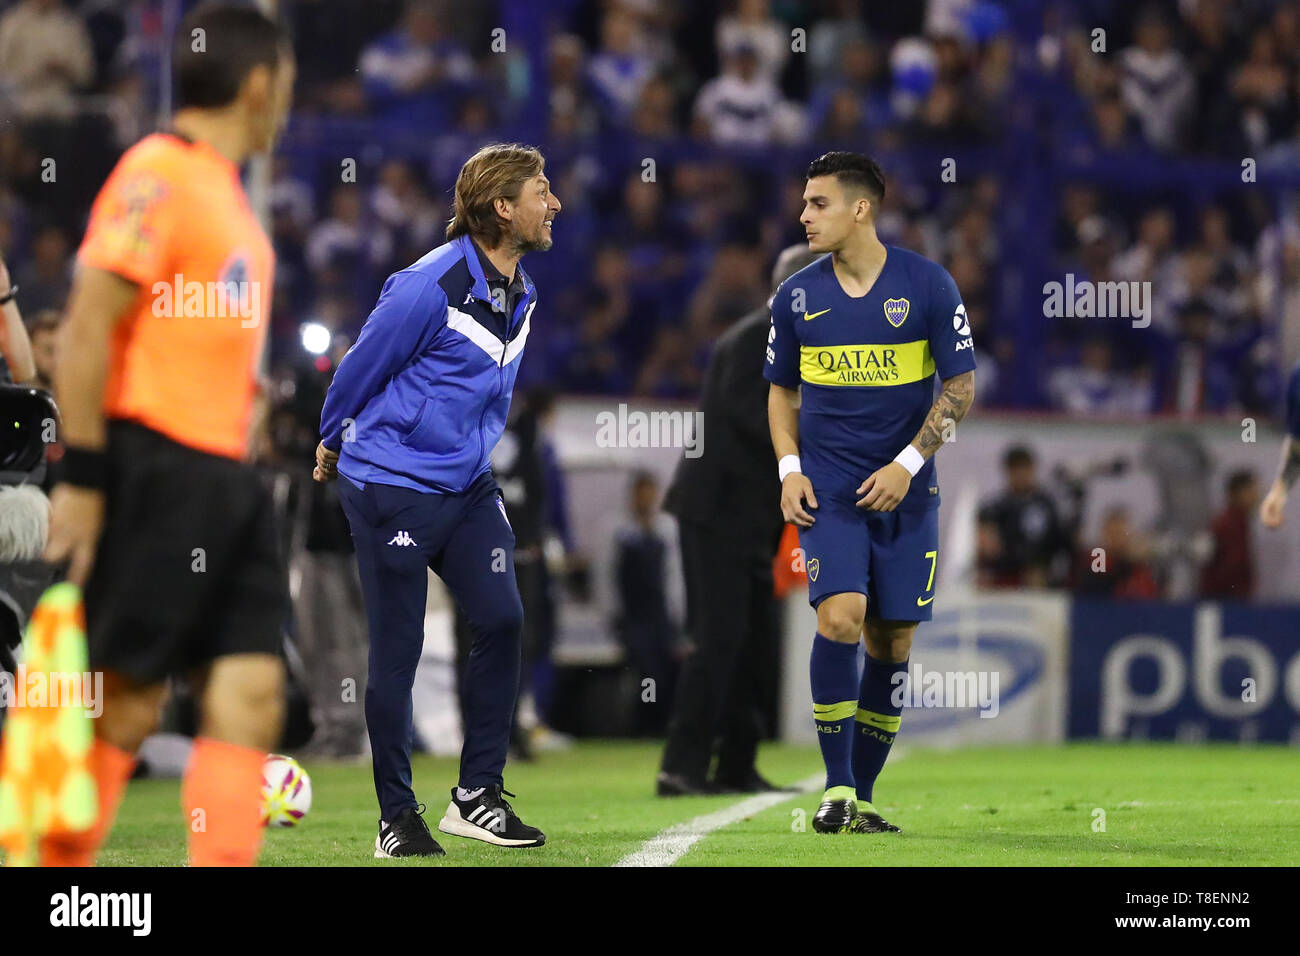 Buenos Aires, Argentina - May 12, 2019: Gabriel Heize (DT Velez) screaming at Cristian Pavon (Boca), this is the first match of Mauro Zarate in Velez  Stock Photo